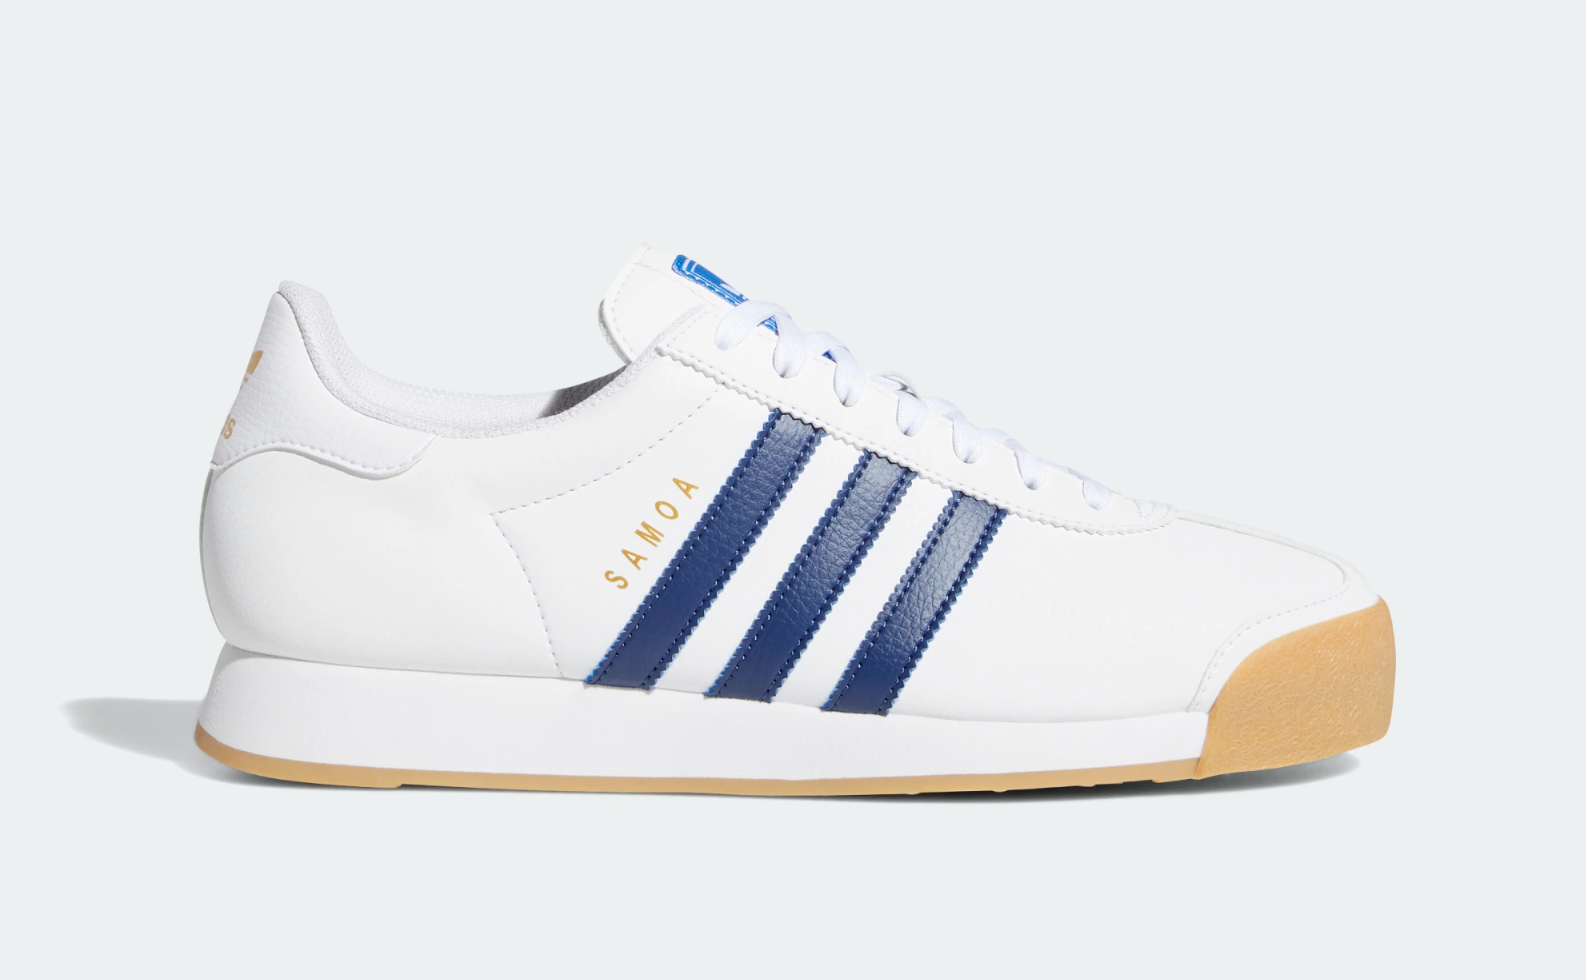 adidas Originals Samoa Vintage Trainers in White and Blue Shoes